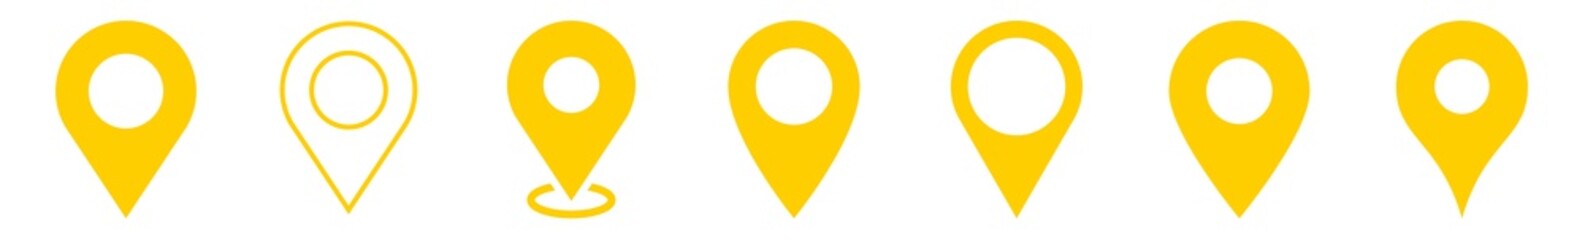 Location Pin Icon Yellow | Map Marker Illustration | Destination Symbol | Pointer Logo | Position Sign | Isolated | Variations